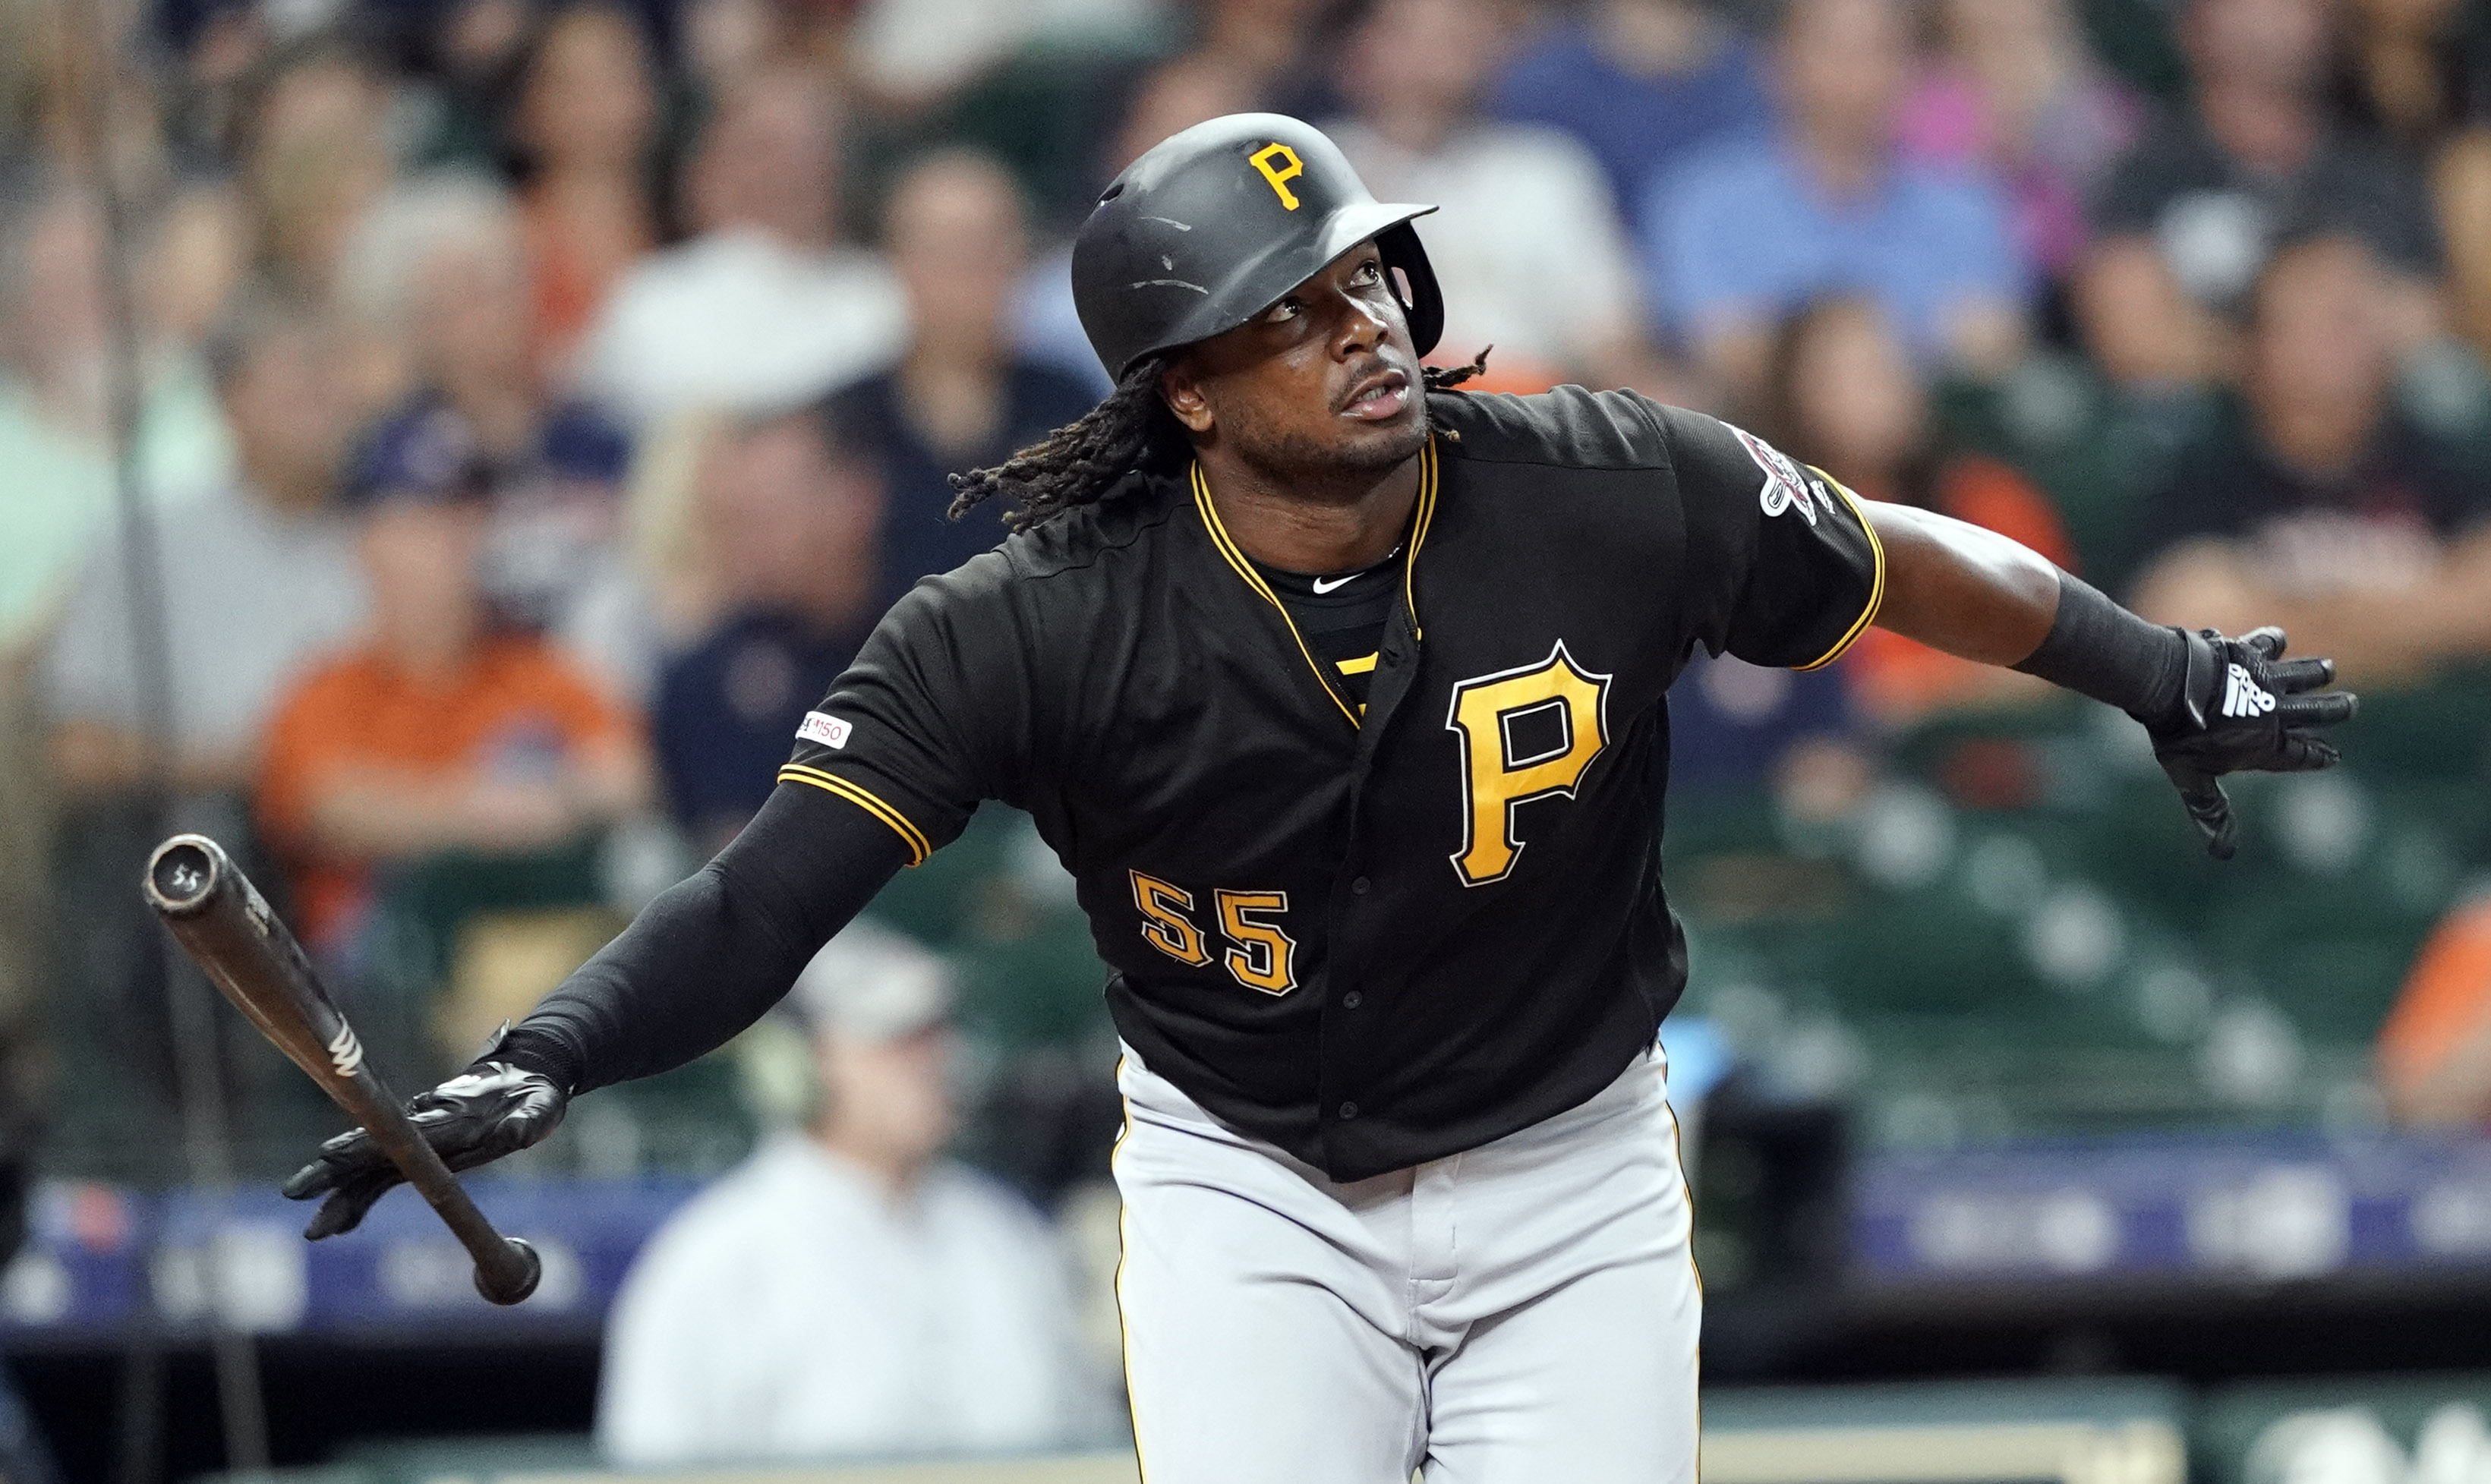 Bell, Dickerson lead Pirates to 14-2 rout of Astros